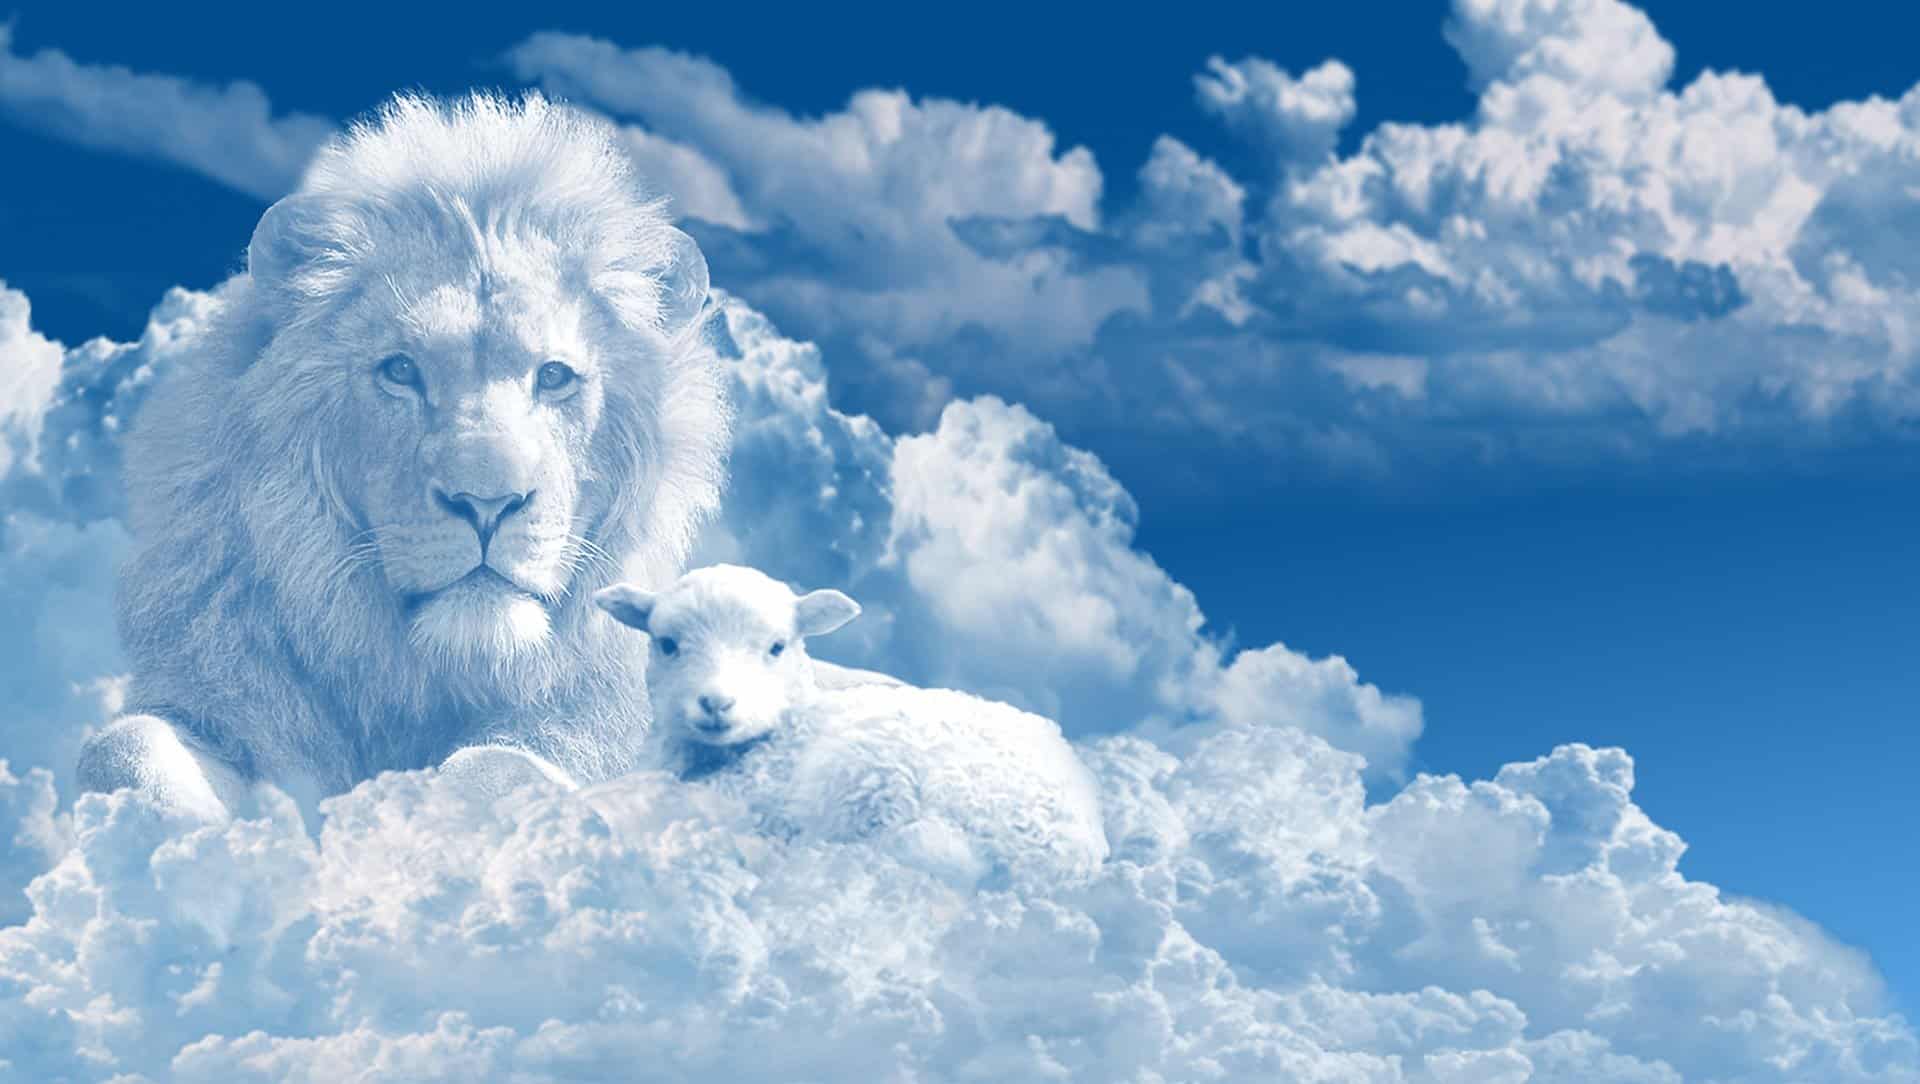 lion and lamb in clouds - future faith knowing the end